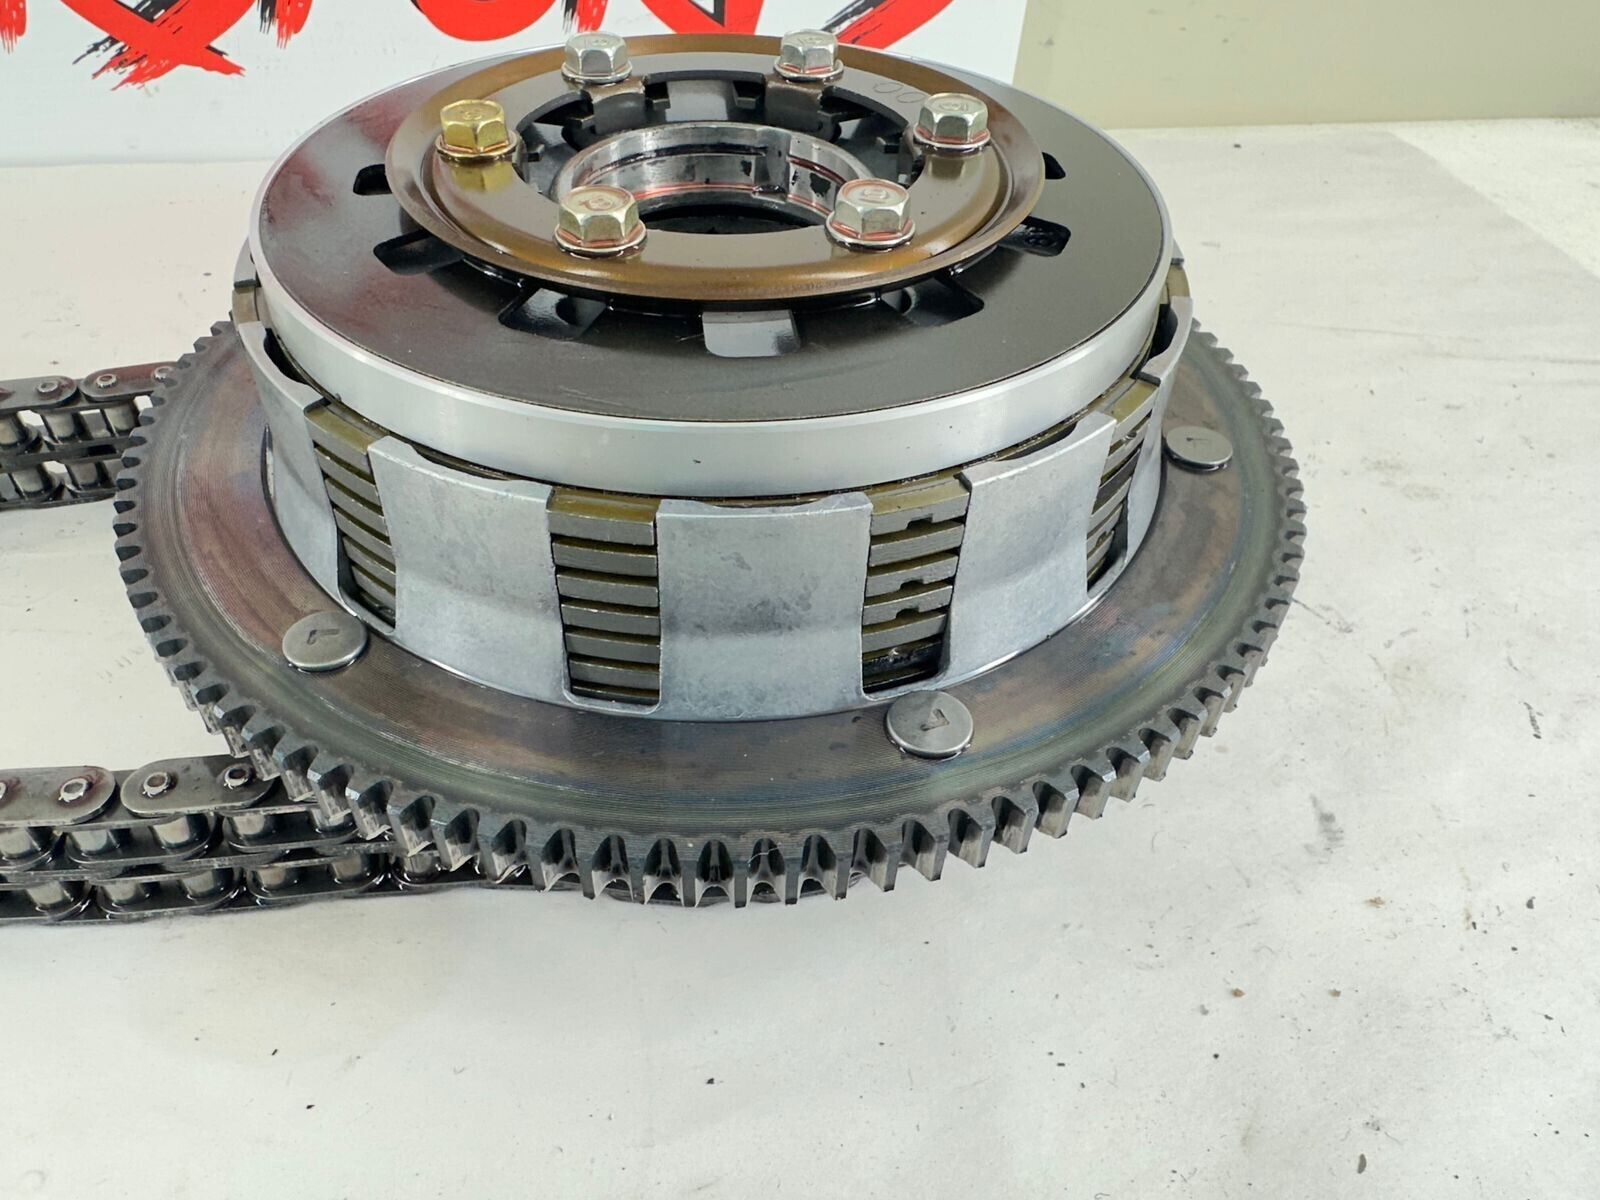 2001 HARLEY SOFTAIL 94-06 Primary Clutch Chain Gears